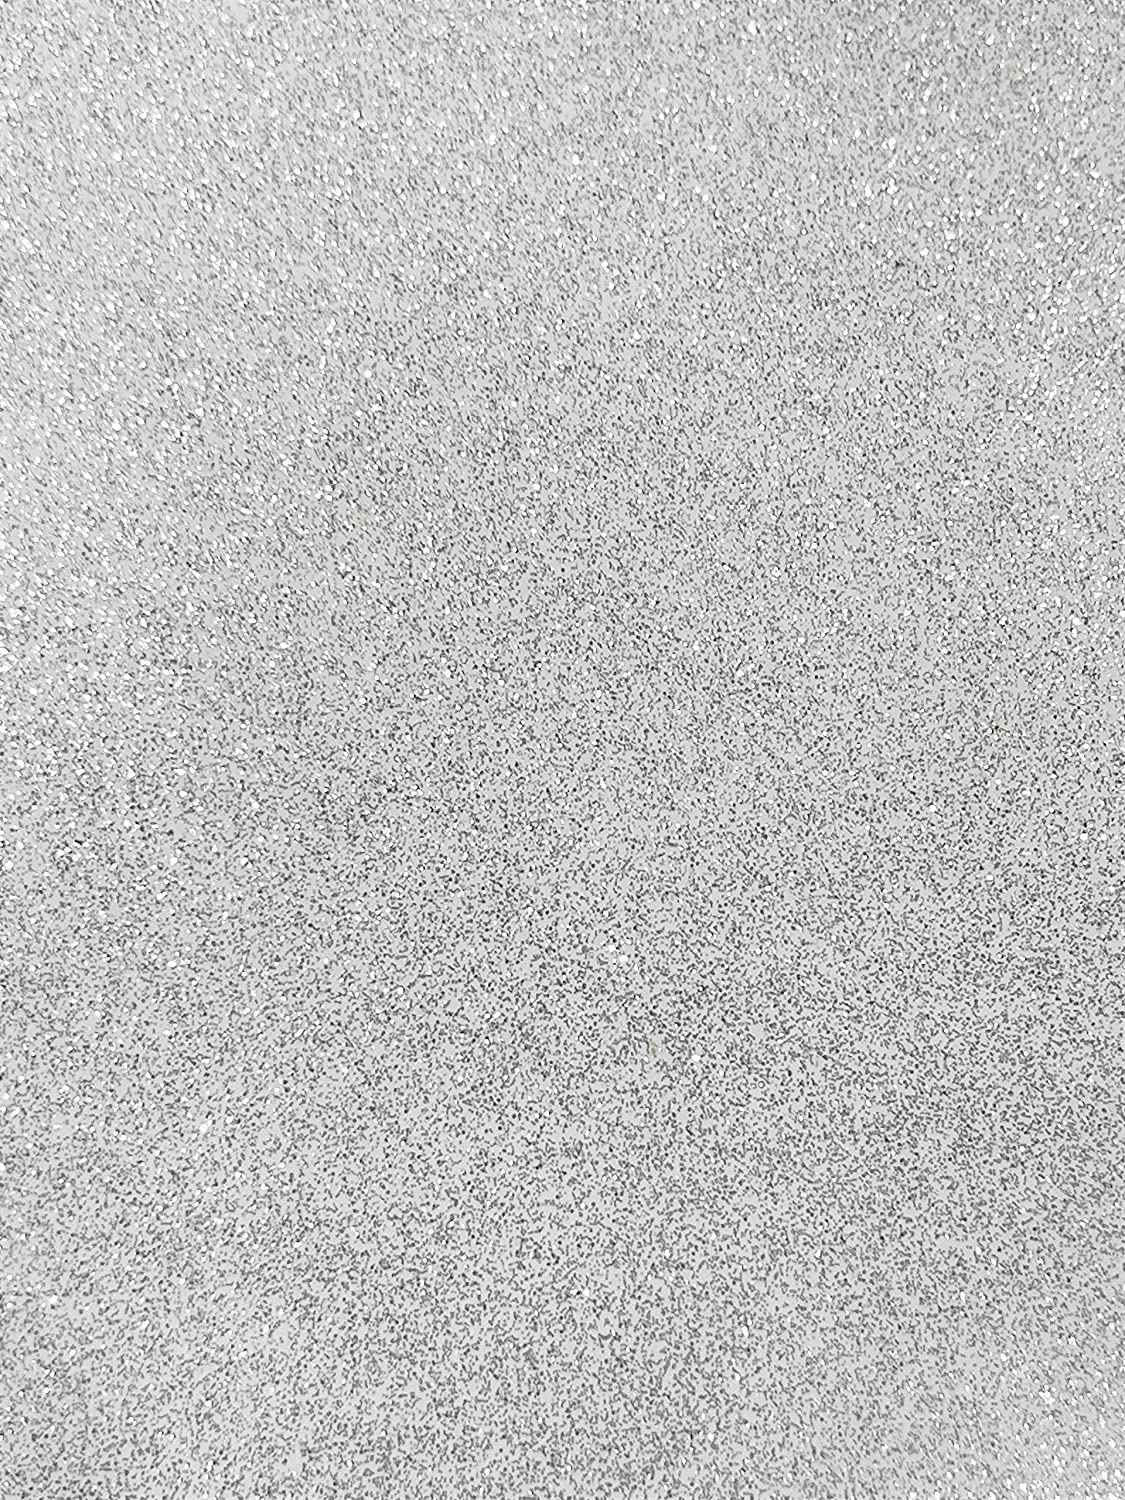 53/54" Wide Shiny Sparkle Glitter Vinyl, Faux Leather PVC-Upholstery Craft Fabric by The Yard (White, 1 Yard)